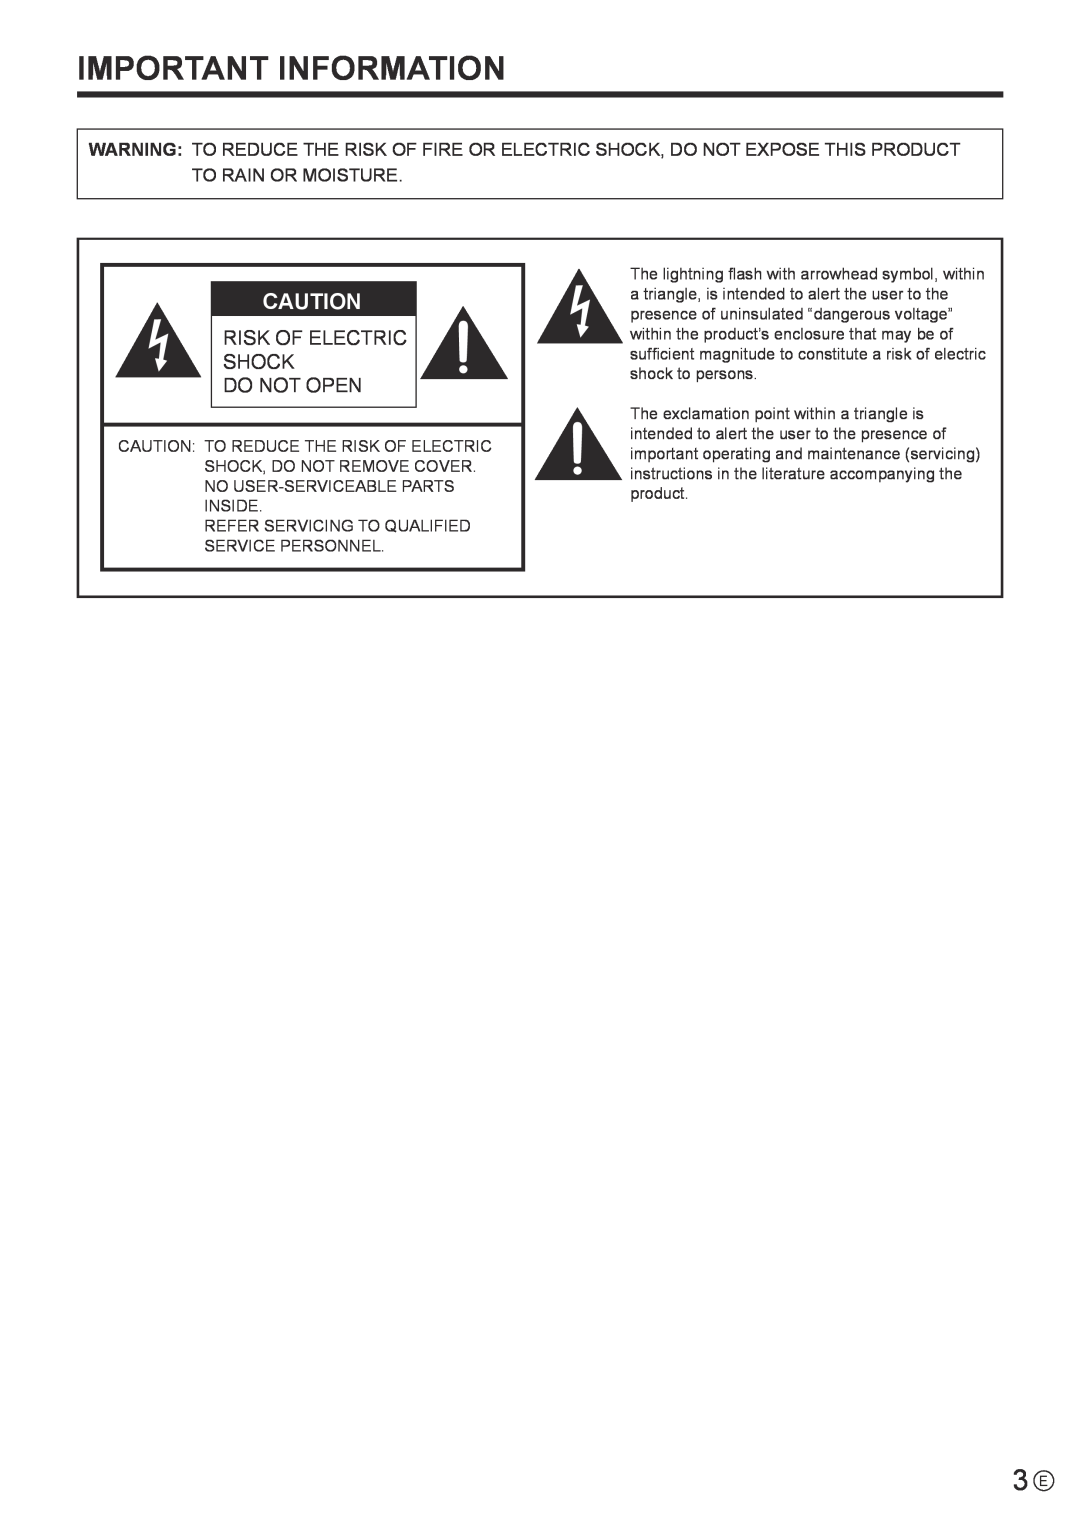 Sharp PN-K321 operation manual Important Information, Risk Of Electric Shock Do Not Open 